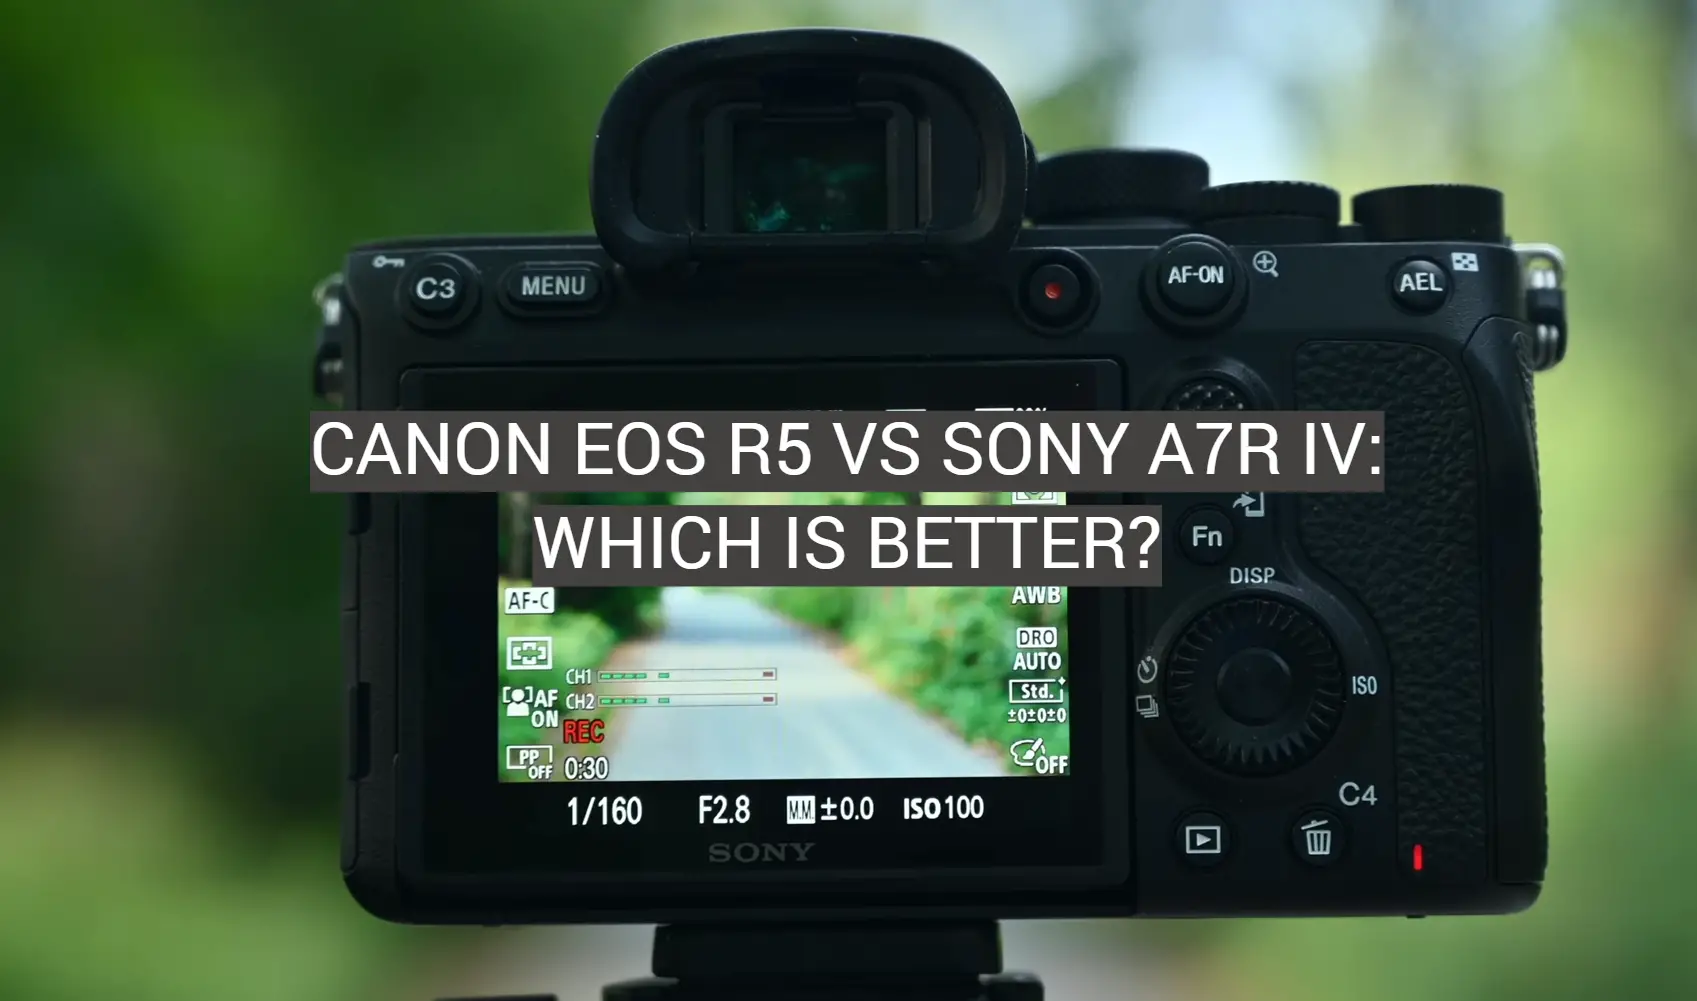 Canon EOS R5 vs Sony a7R IV: Which is Better?